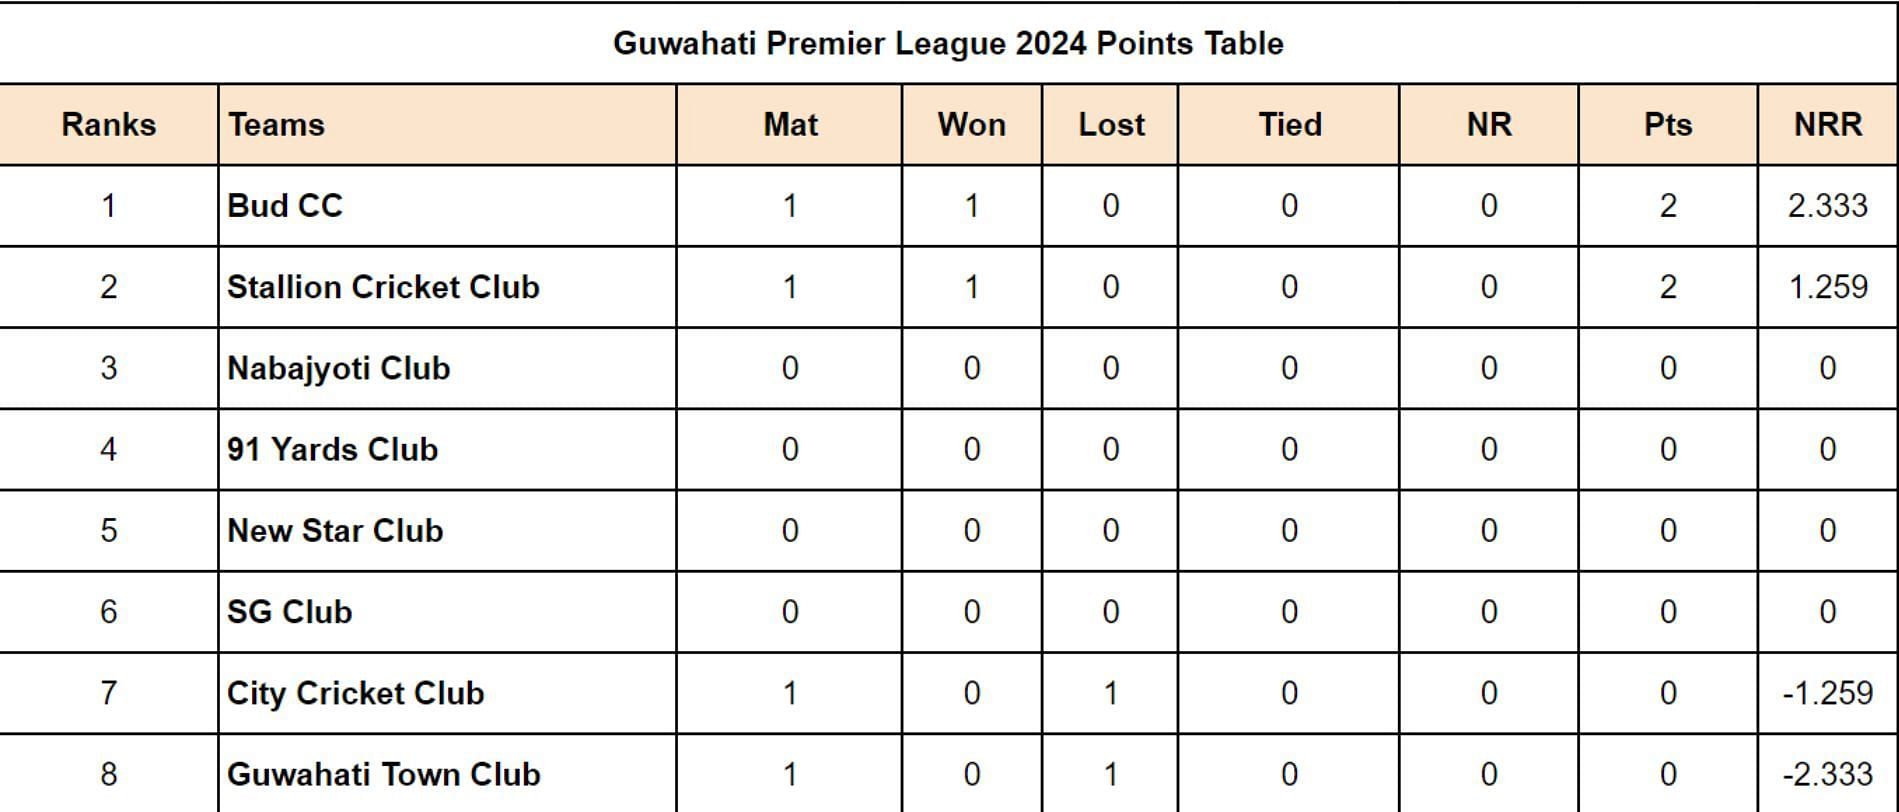 Guwahati Premier League 2024 Points Table Updated after Match 2